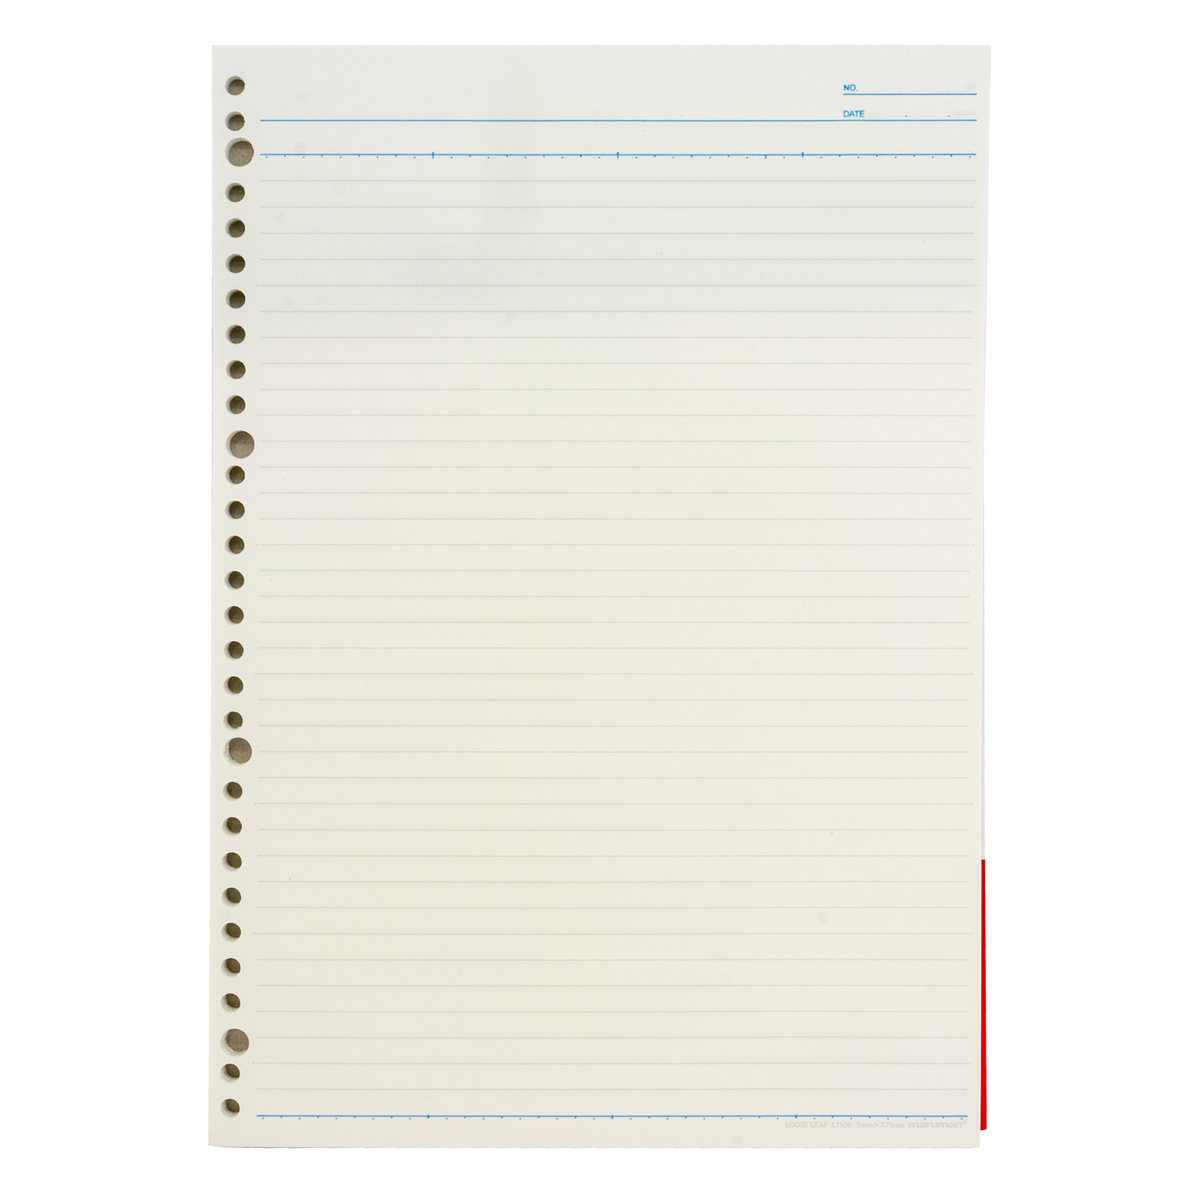 Maruman Loose Leaf Notepad - A4 - Easy to Write - 7mm Rule